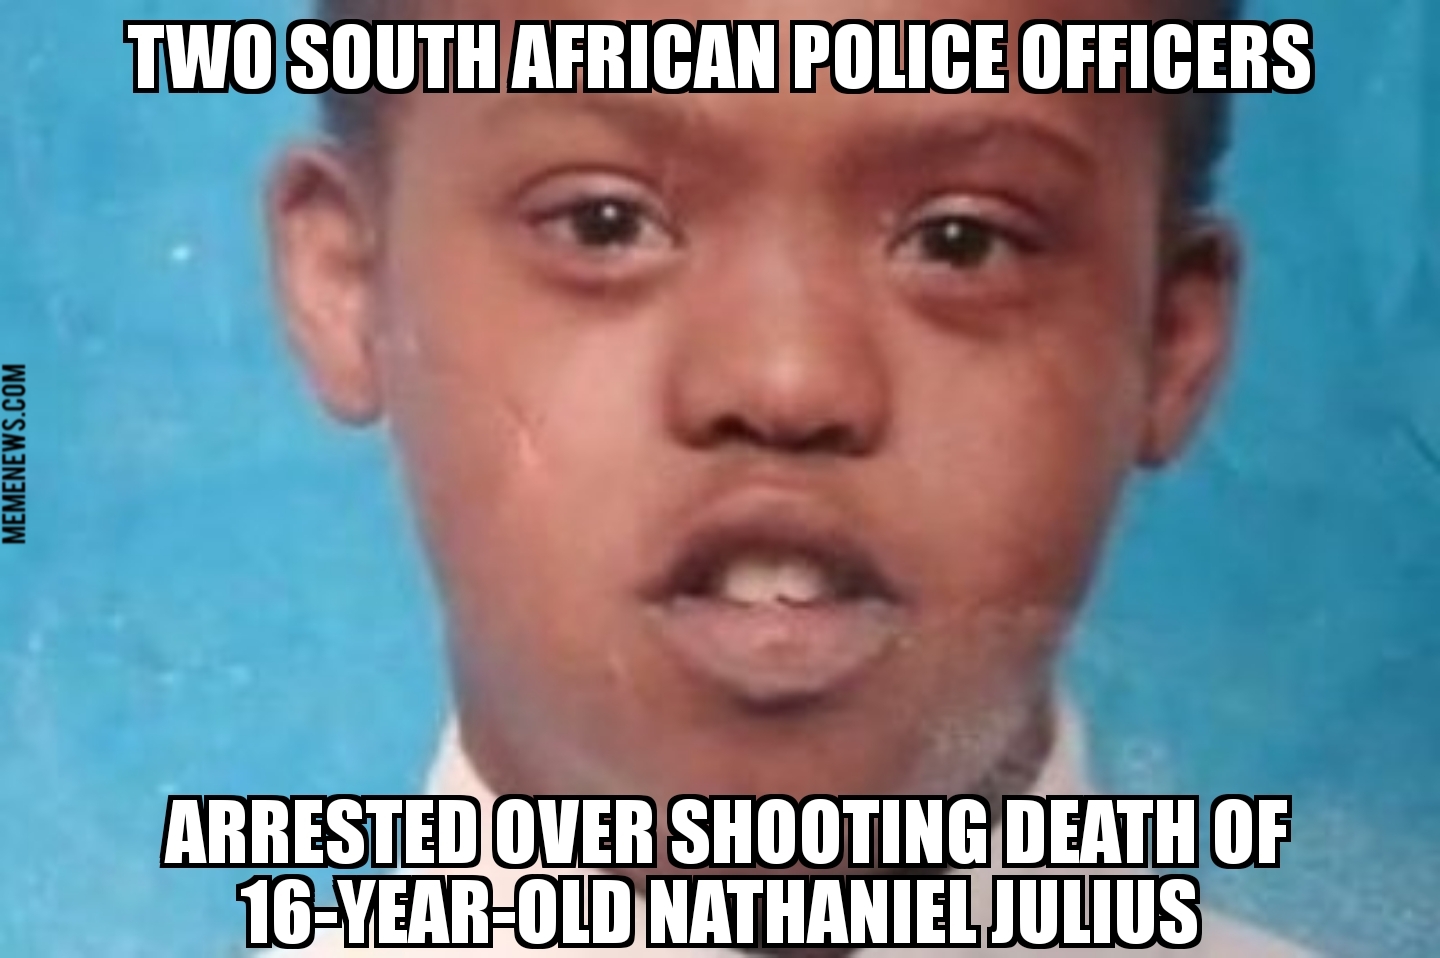 South African police arrested over Nathaniel Julius killing